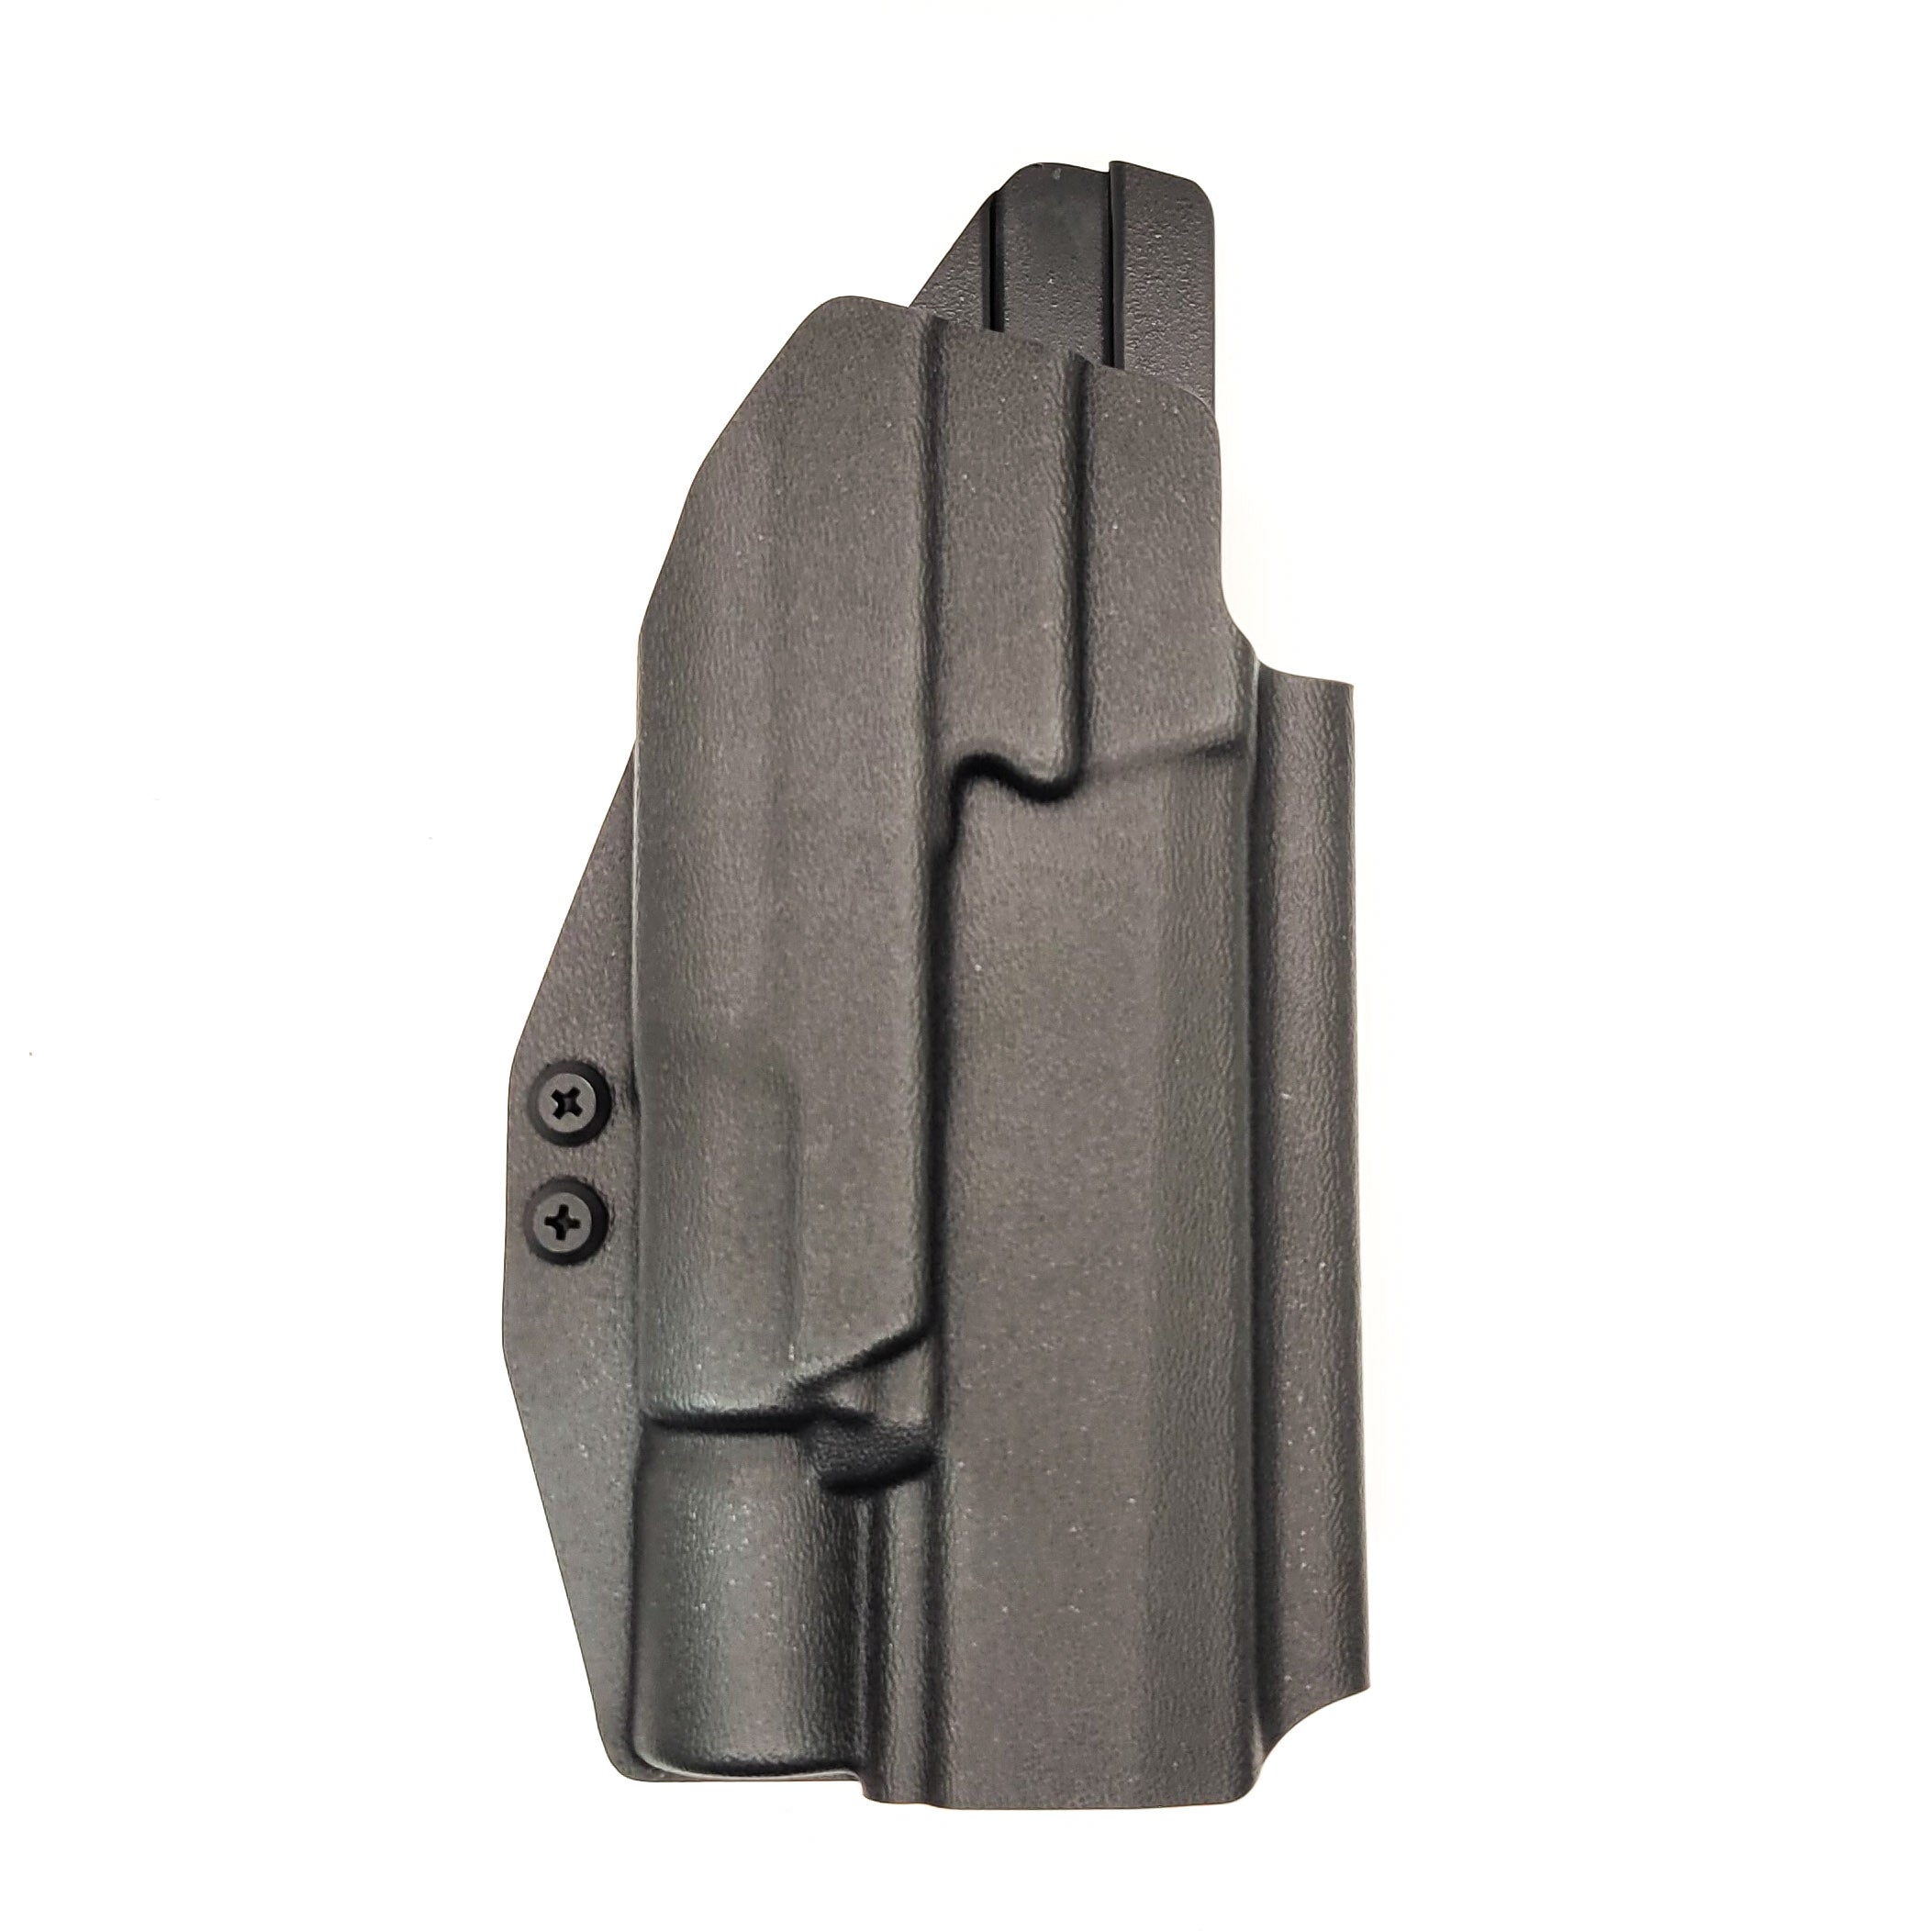 Outside Waistband Kydex Holster designed to fit the Sig Sauer P320 Full Size M18, M17 or X-Five Legion &  Carry pistols with the Surefire X300U-A or X300U-B light mounted to the pistol. The holster retention is on the light, not the pistol, which means the holster will not work without the light mounted on the firearm.